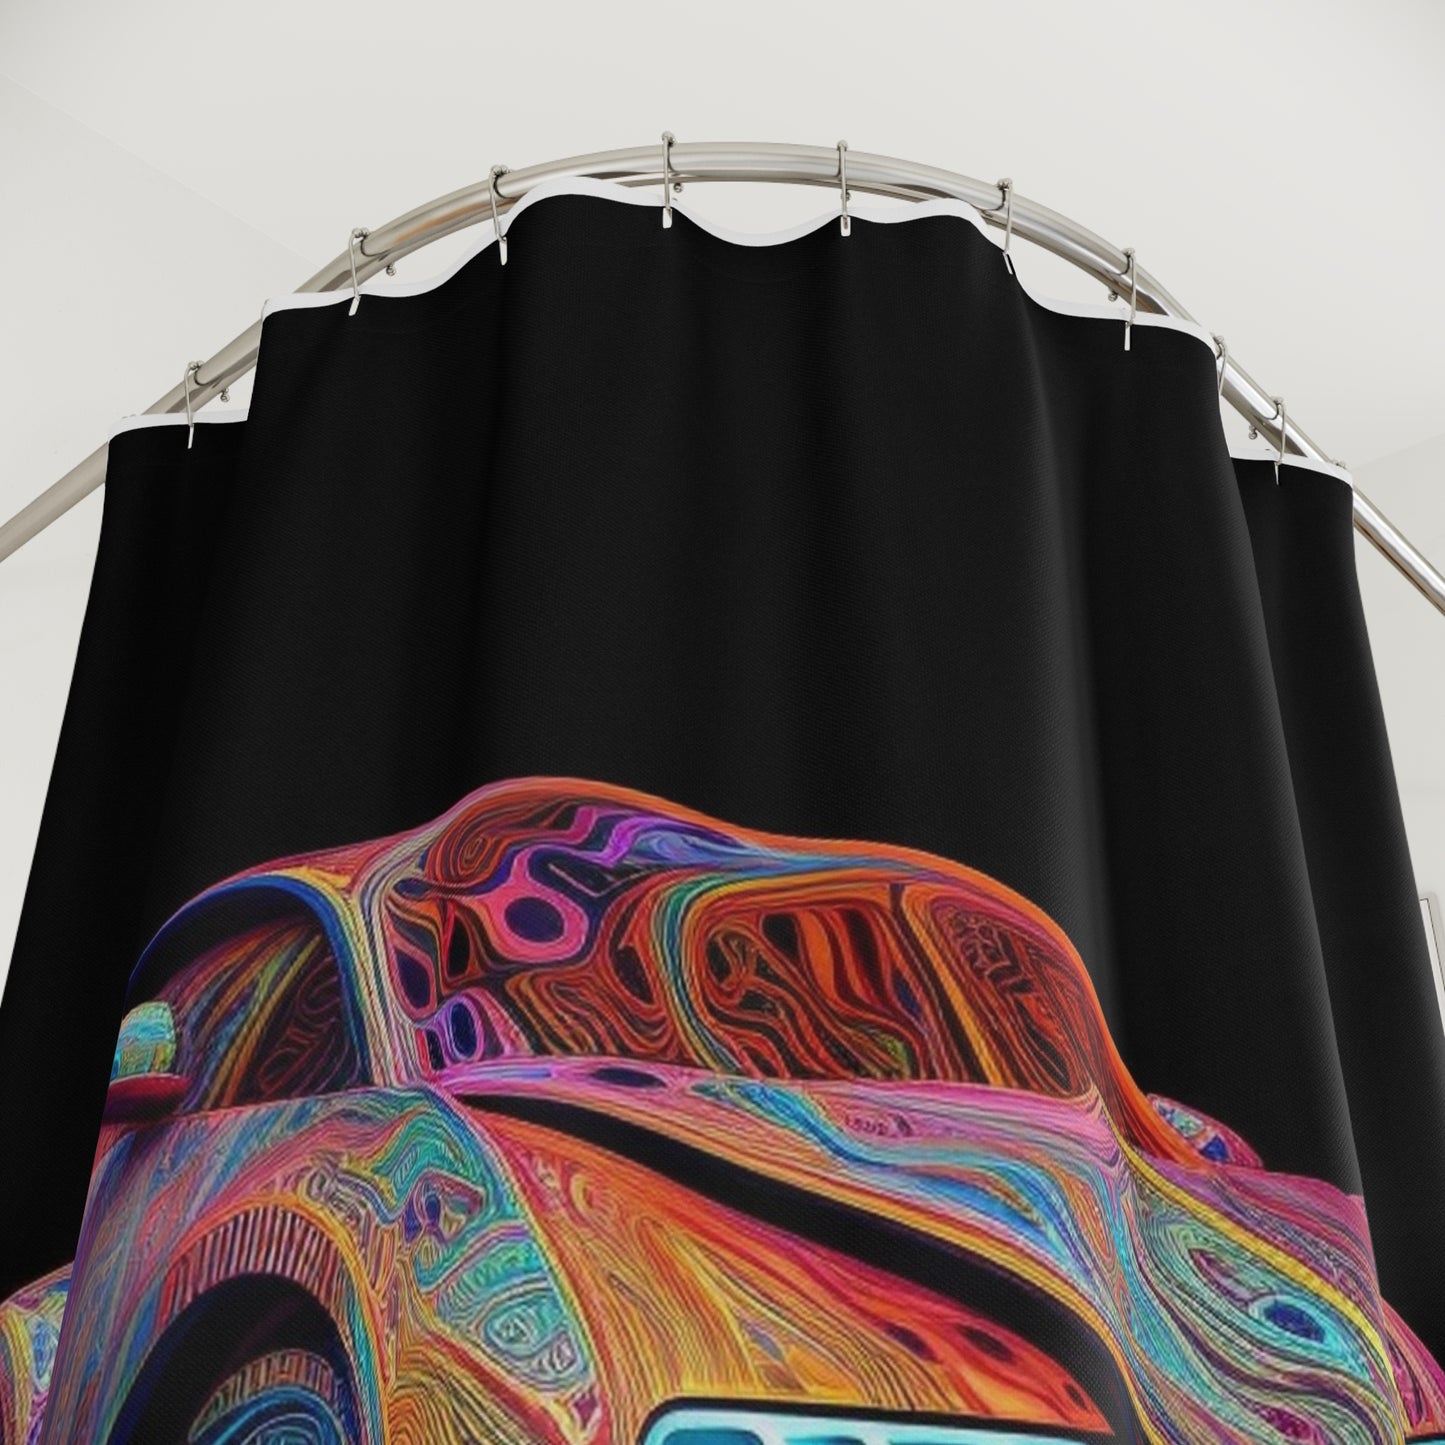 Polyester Shower Curtain Bugatti Abstract Concept 1